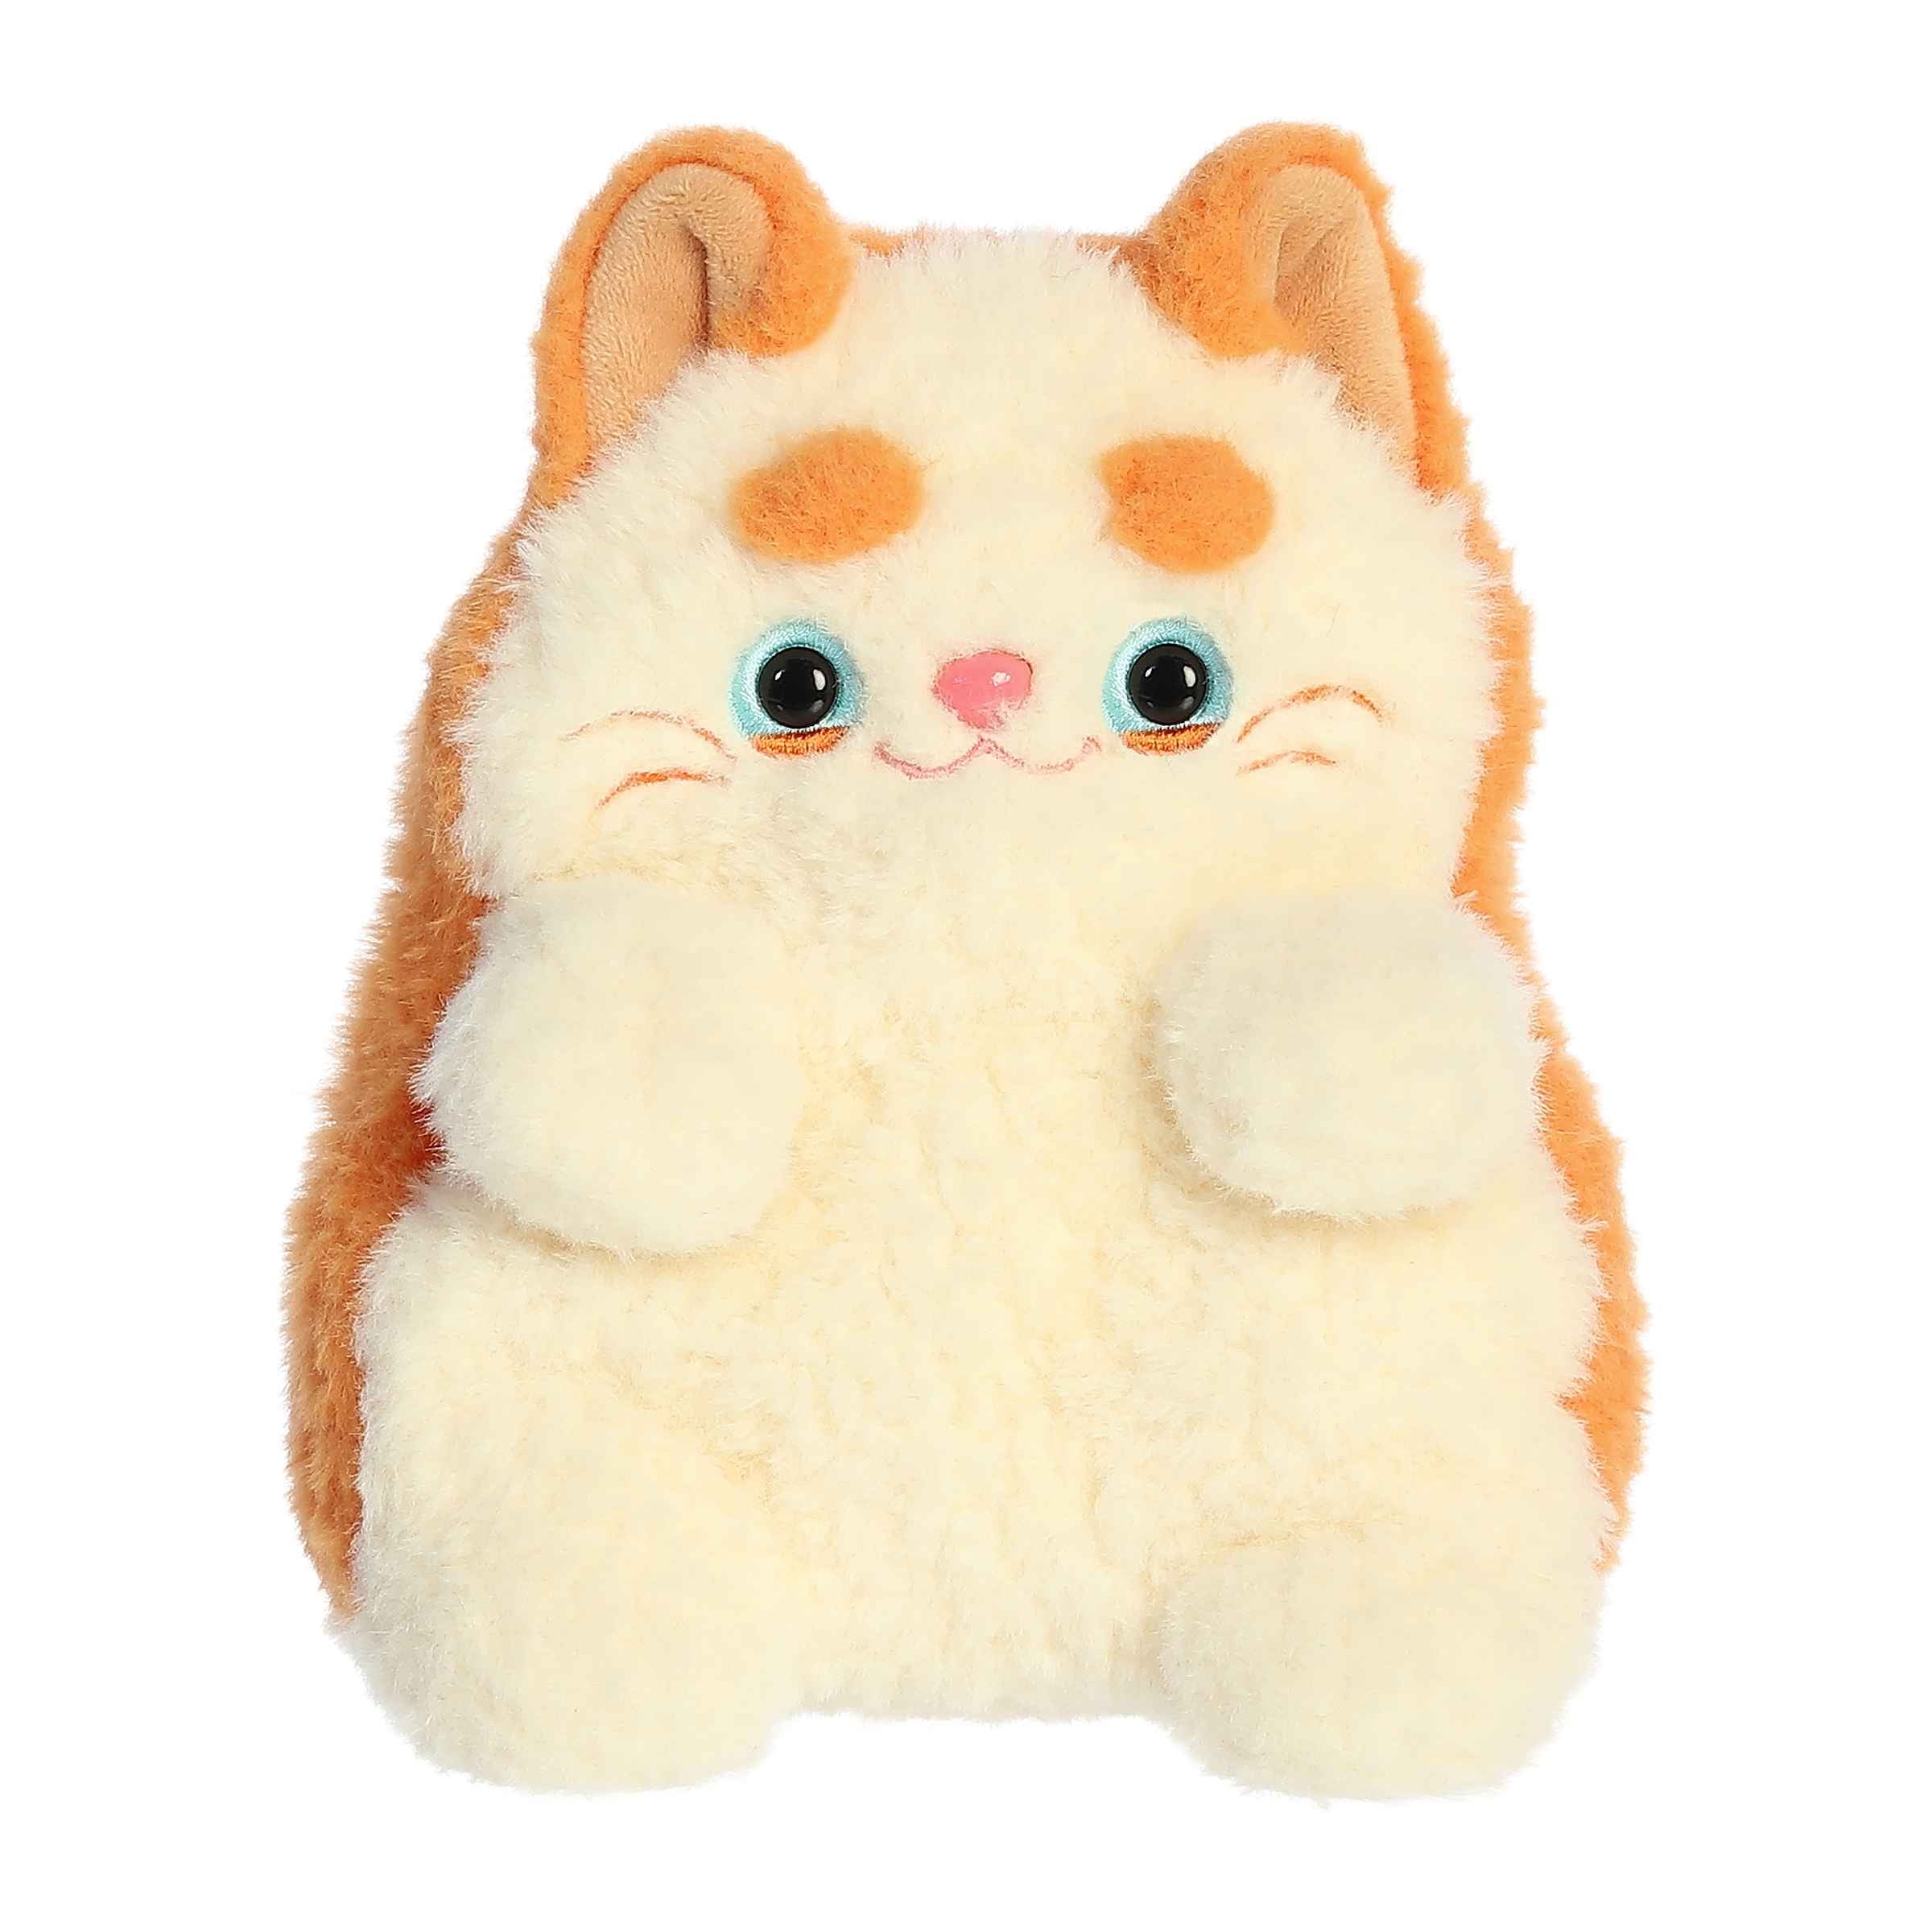 Cheddar plush from MewMews, creamy fur with distinctive orange patches, holding a personality booklet